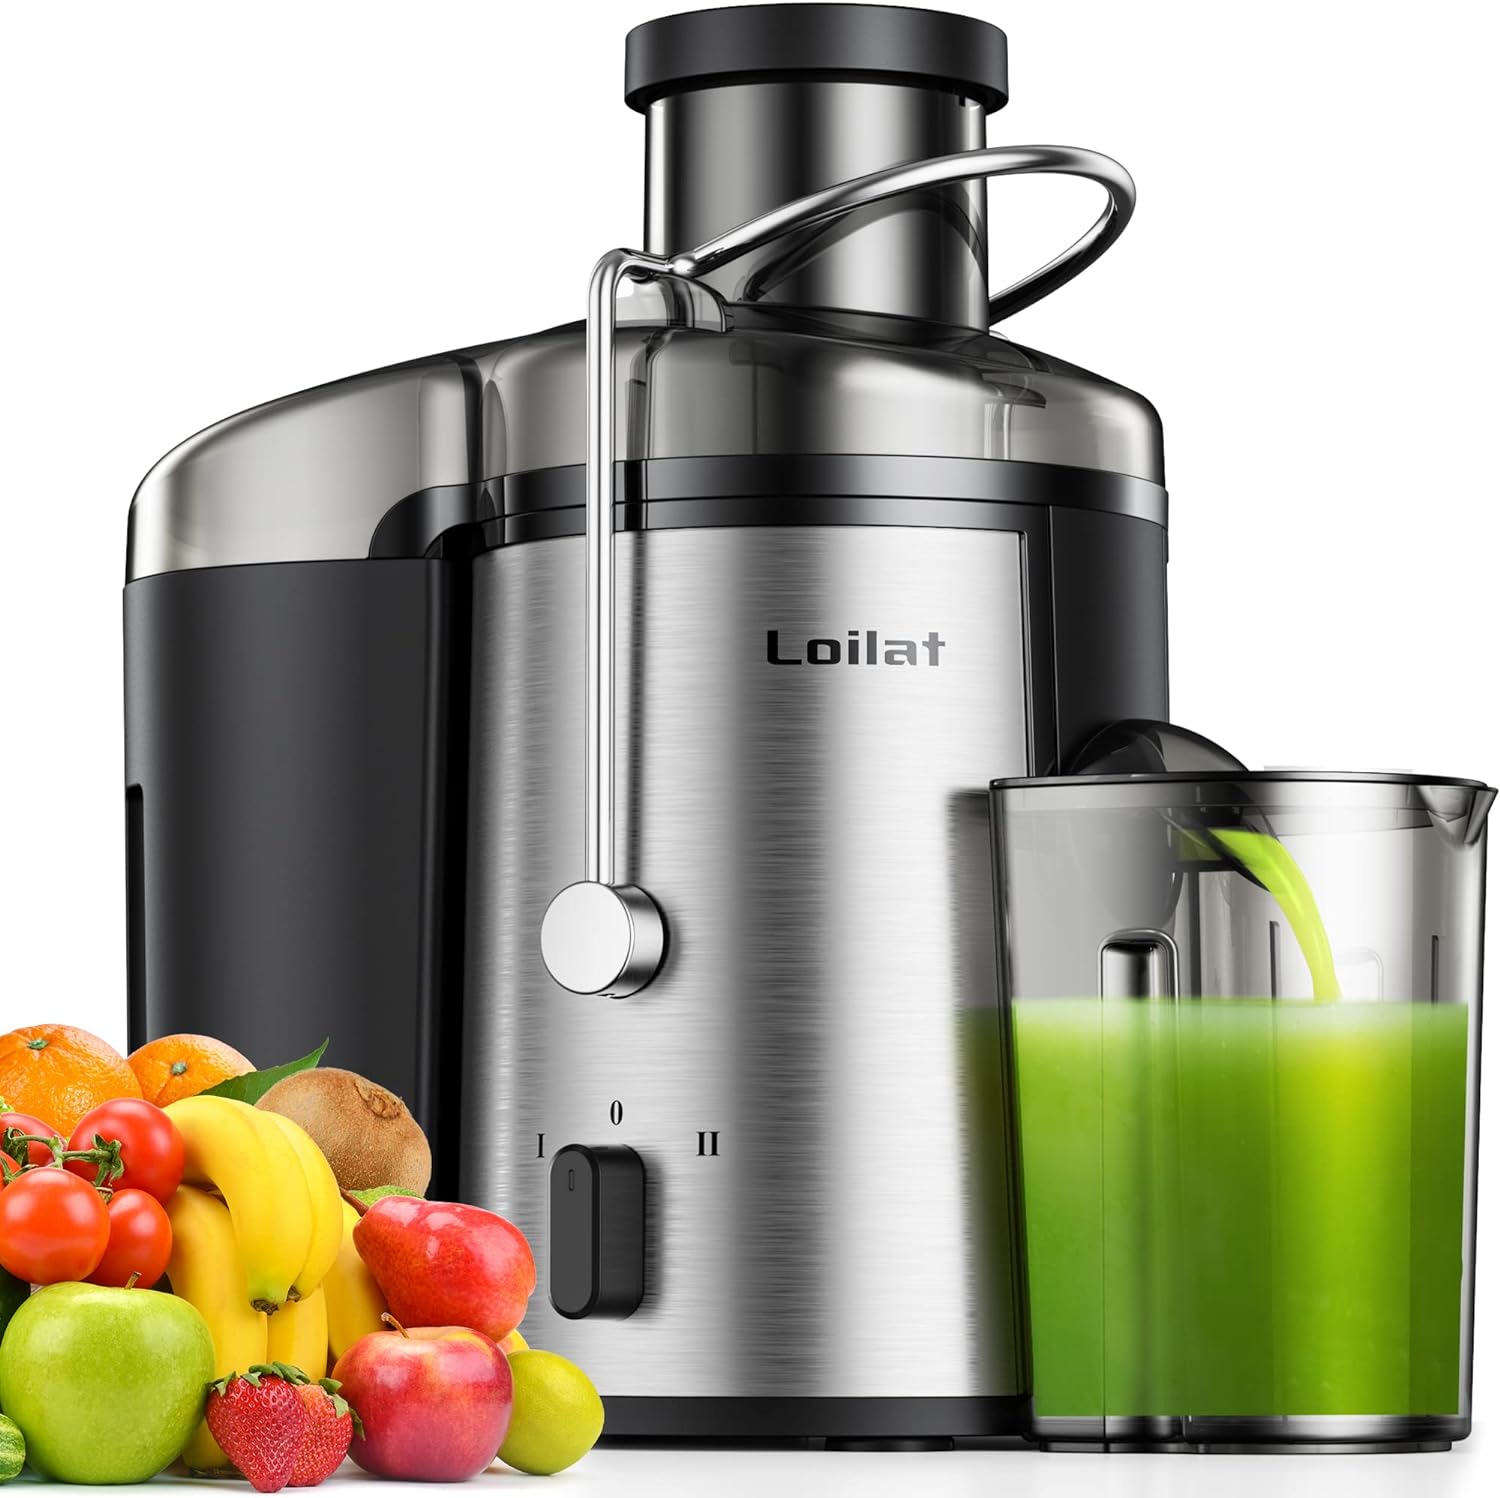 500W Juicer Review